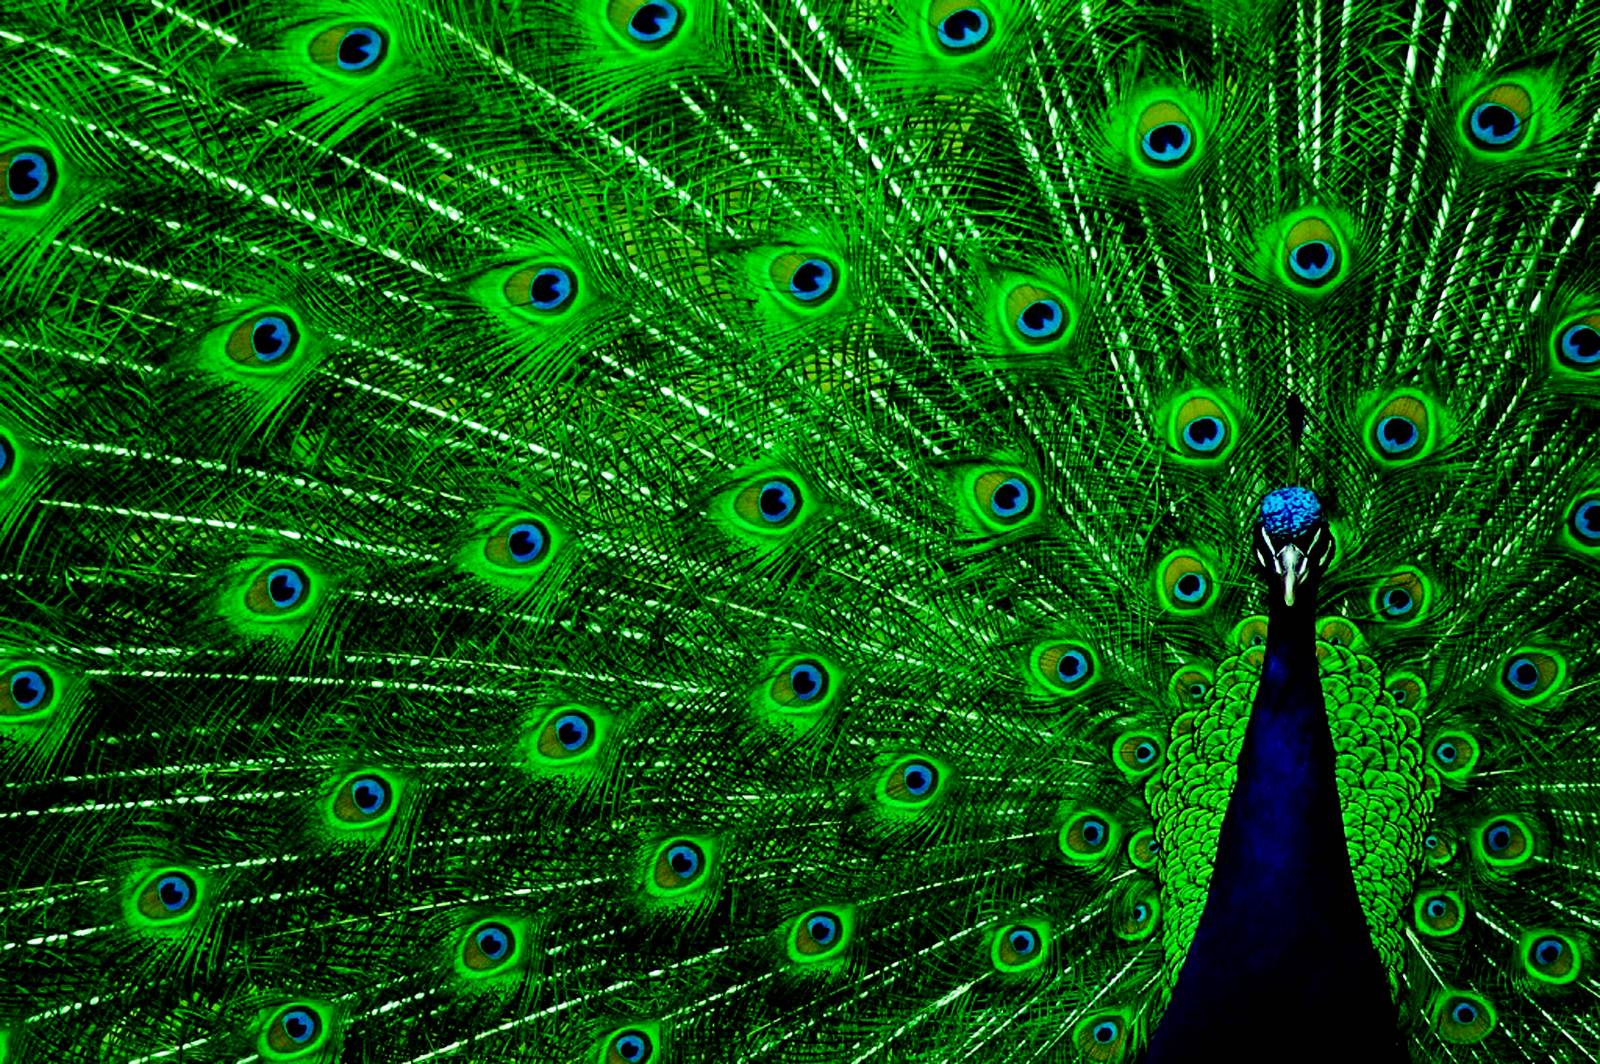 Wallpapers Of Peacock Feathers HD 2015 1600x1064